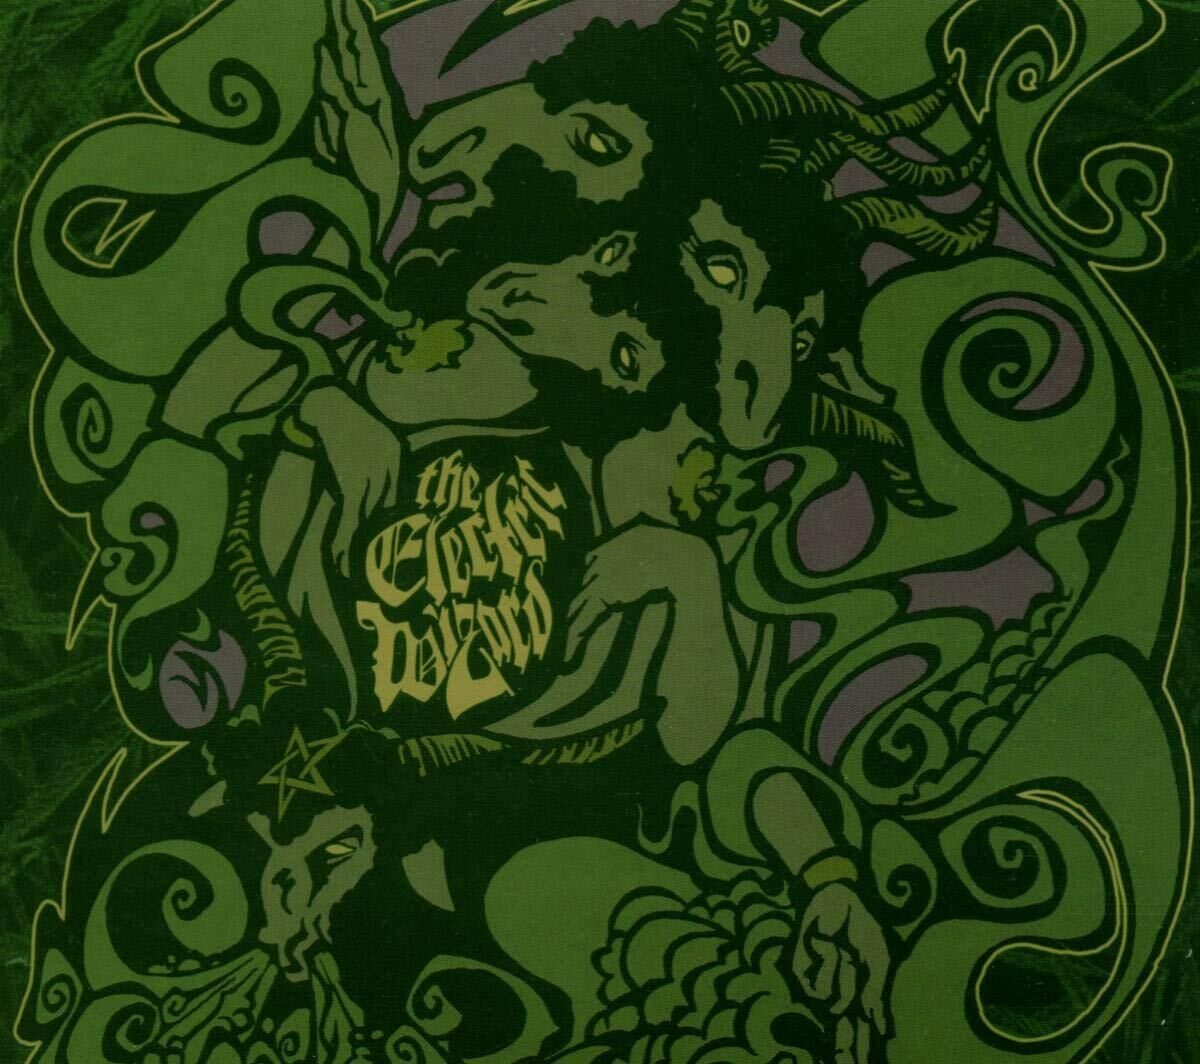 ELECTRIC WIZARD - We Live (Re-Release) [CD]